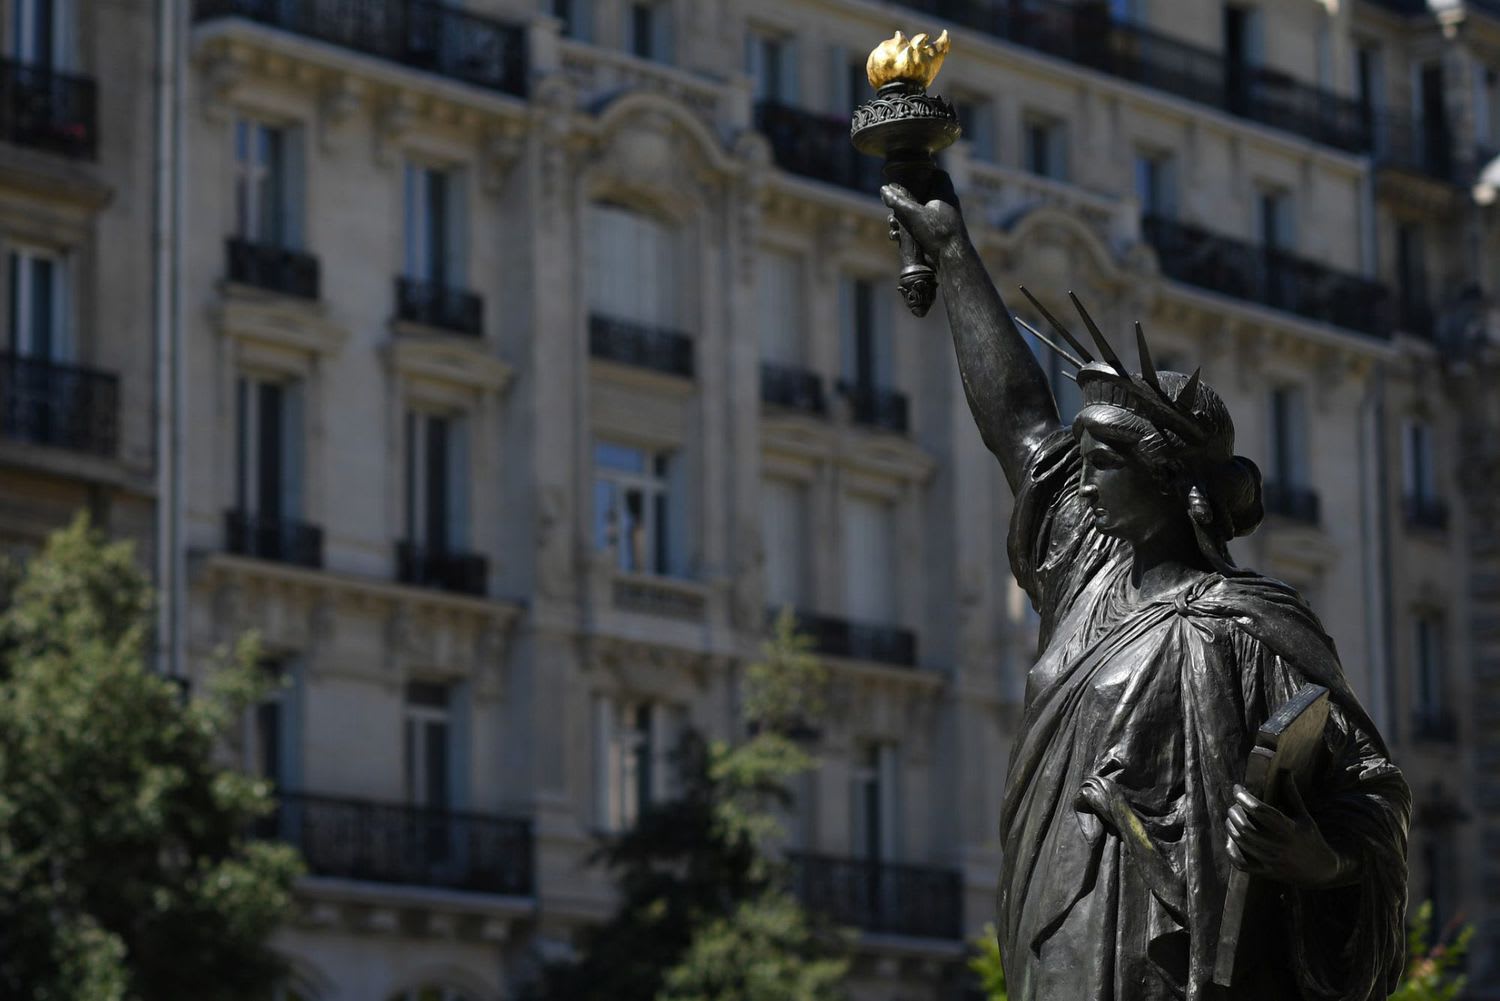 A Mini Replica of the Statue of Liberty Is on Its Way From France to Washington D.C.